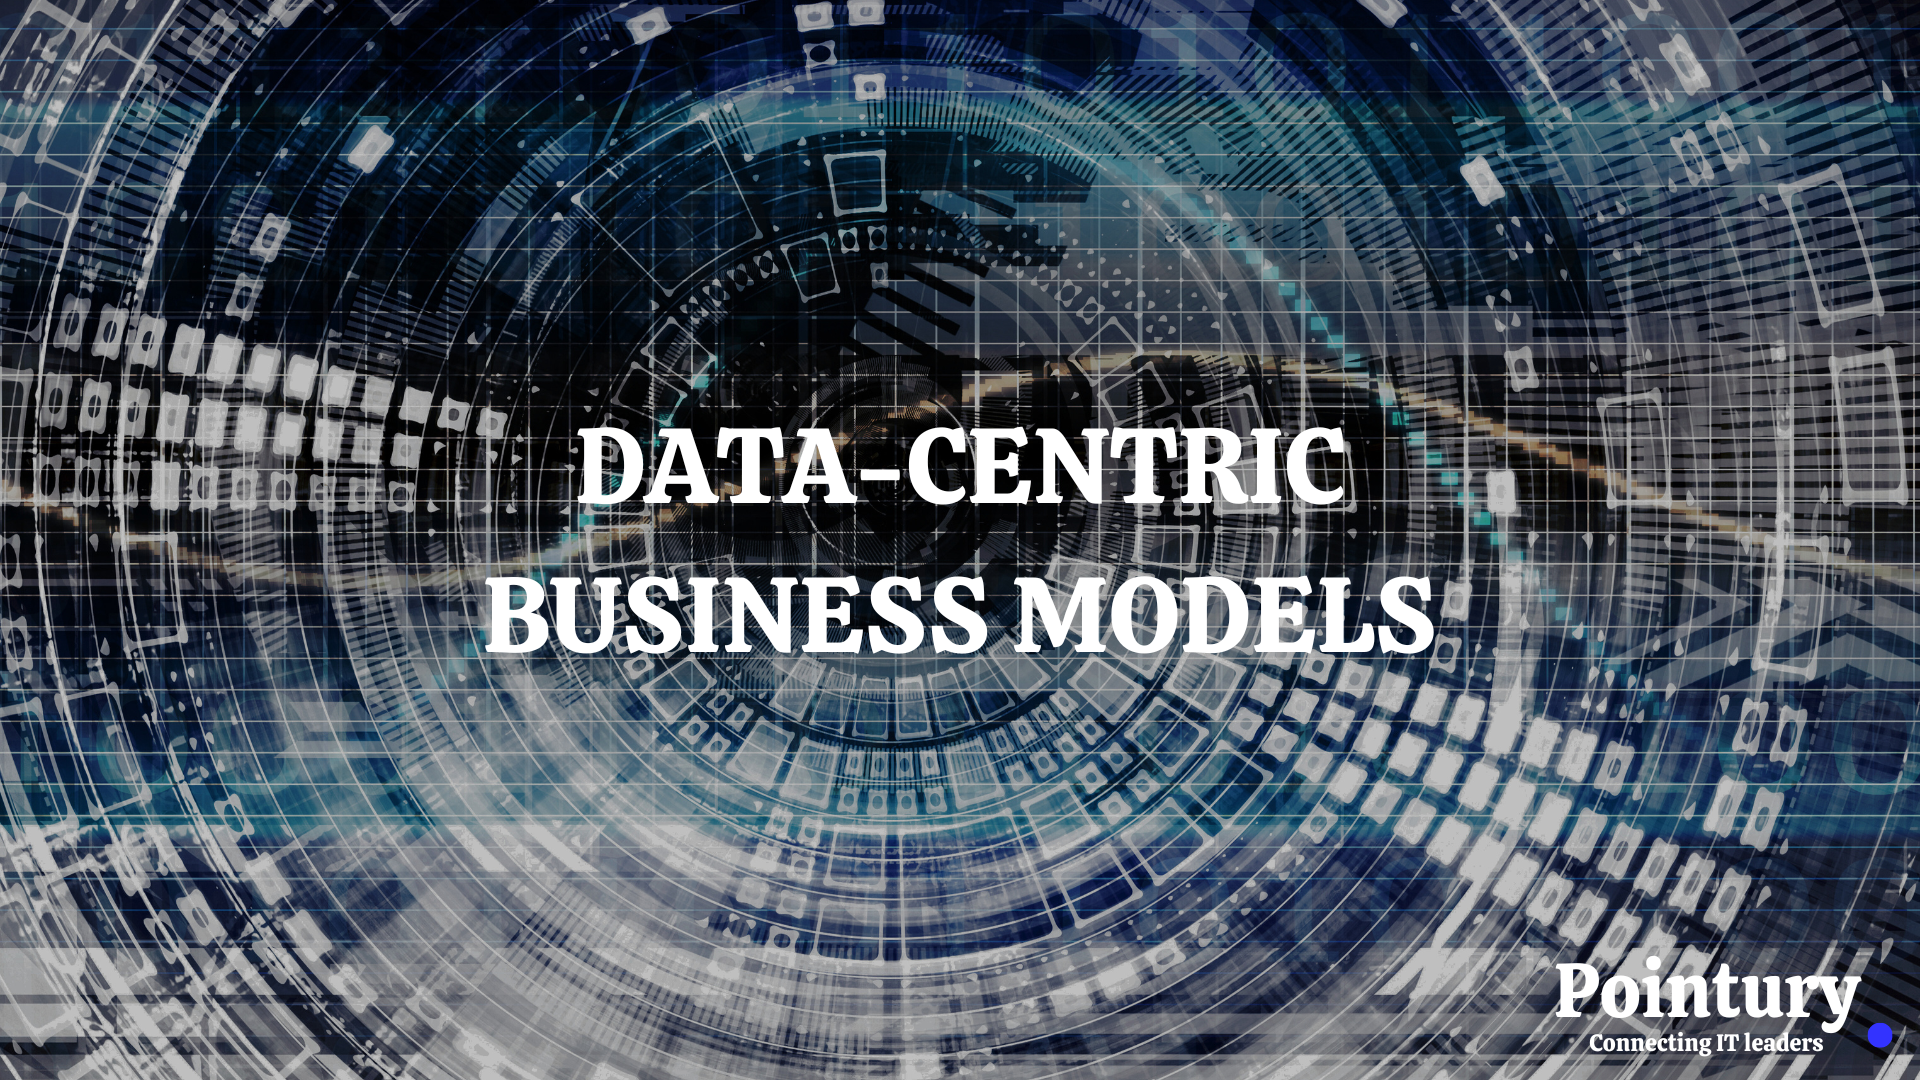 DATA CENTRIC BUSINESS MODELS